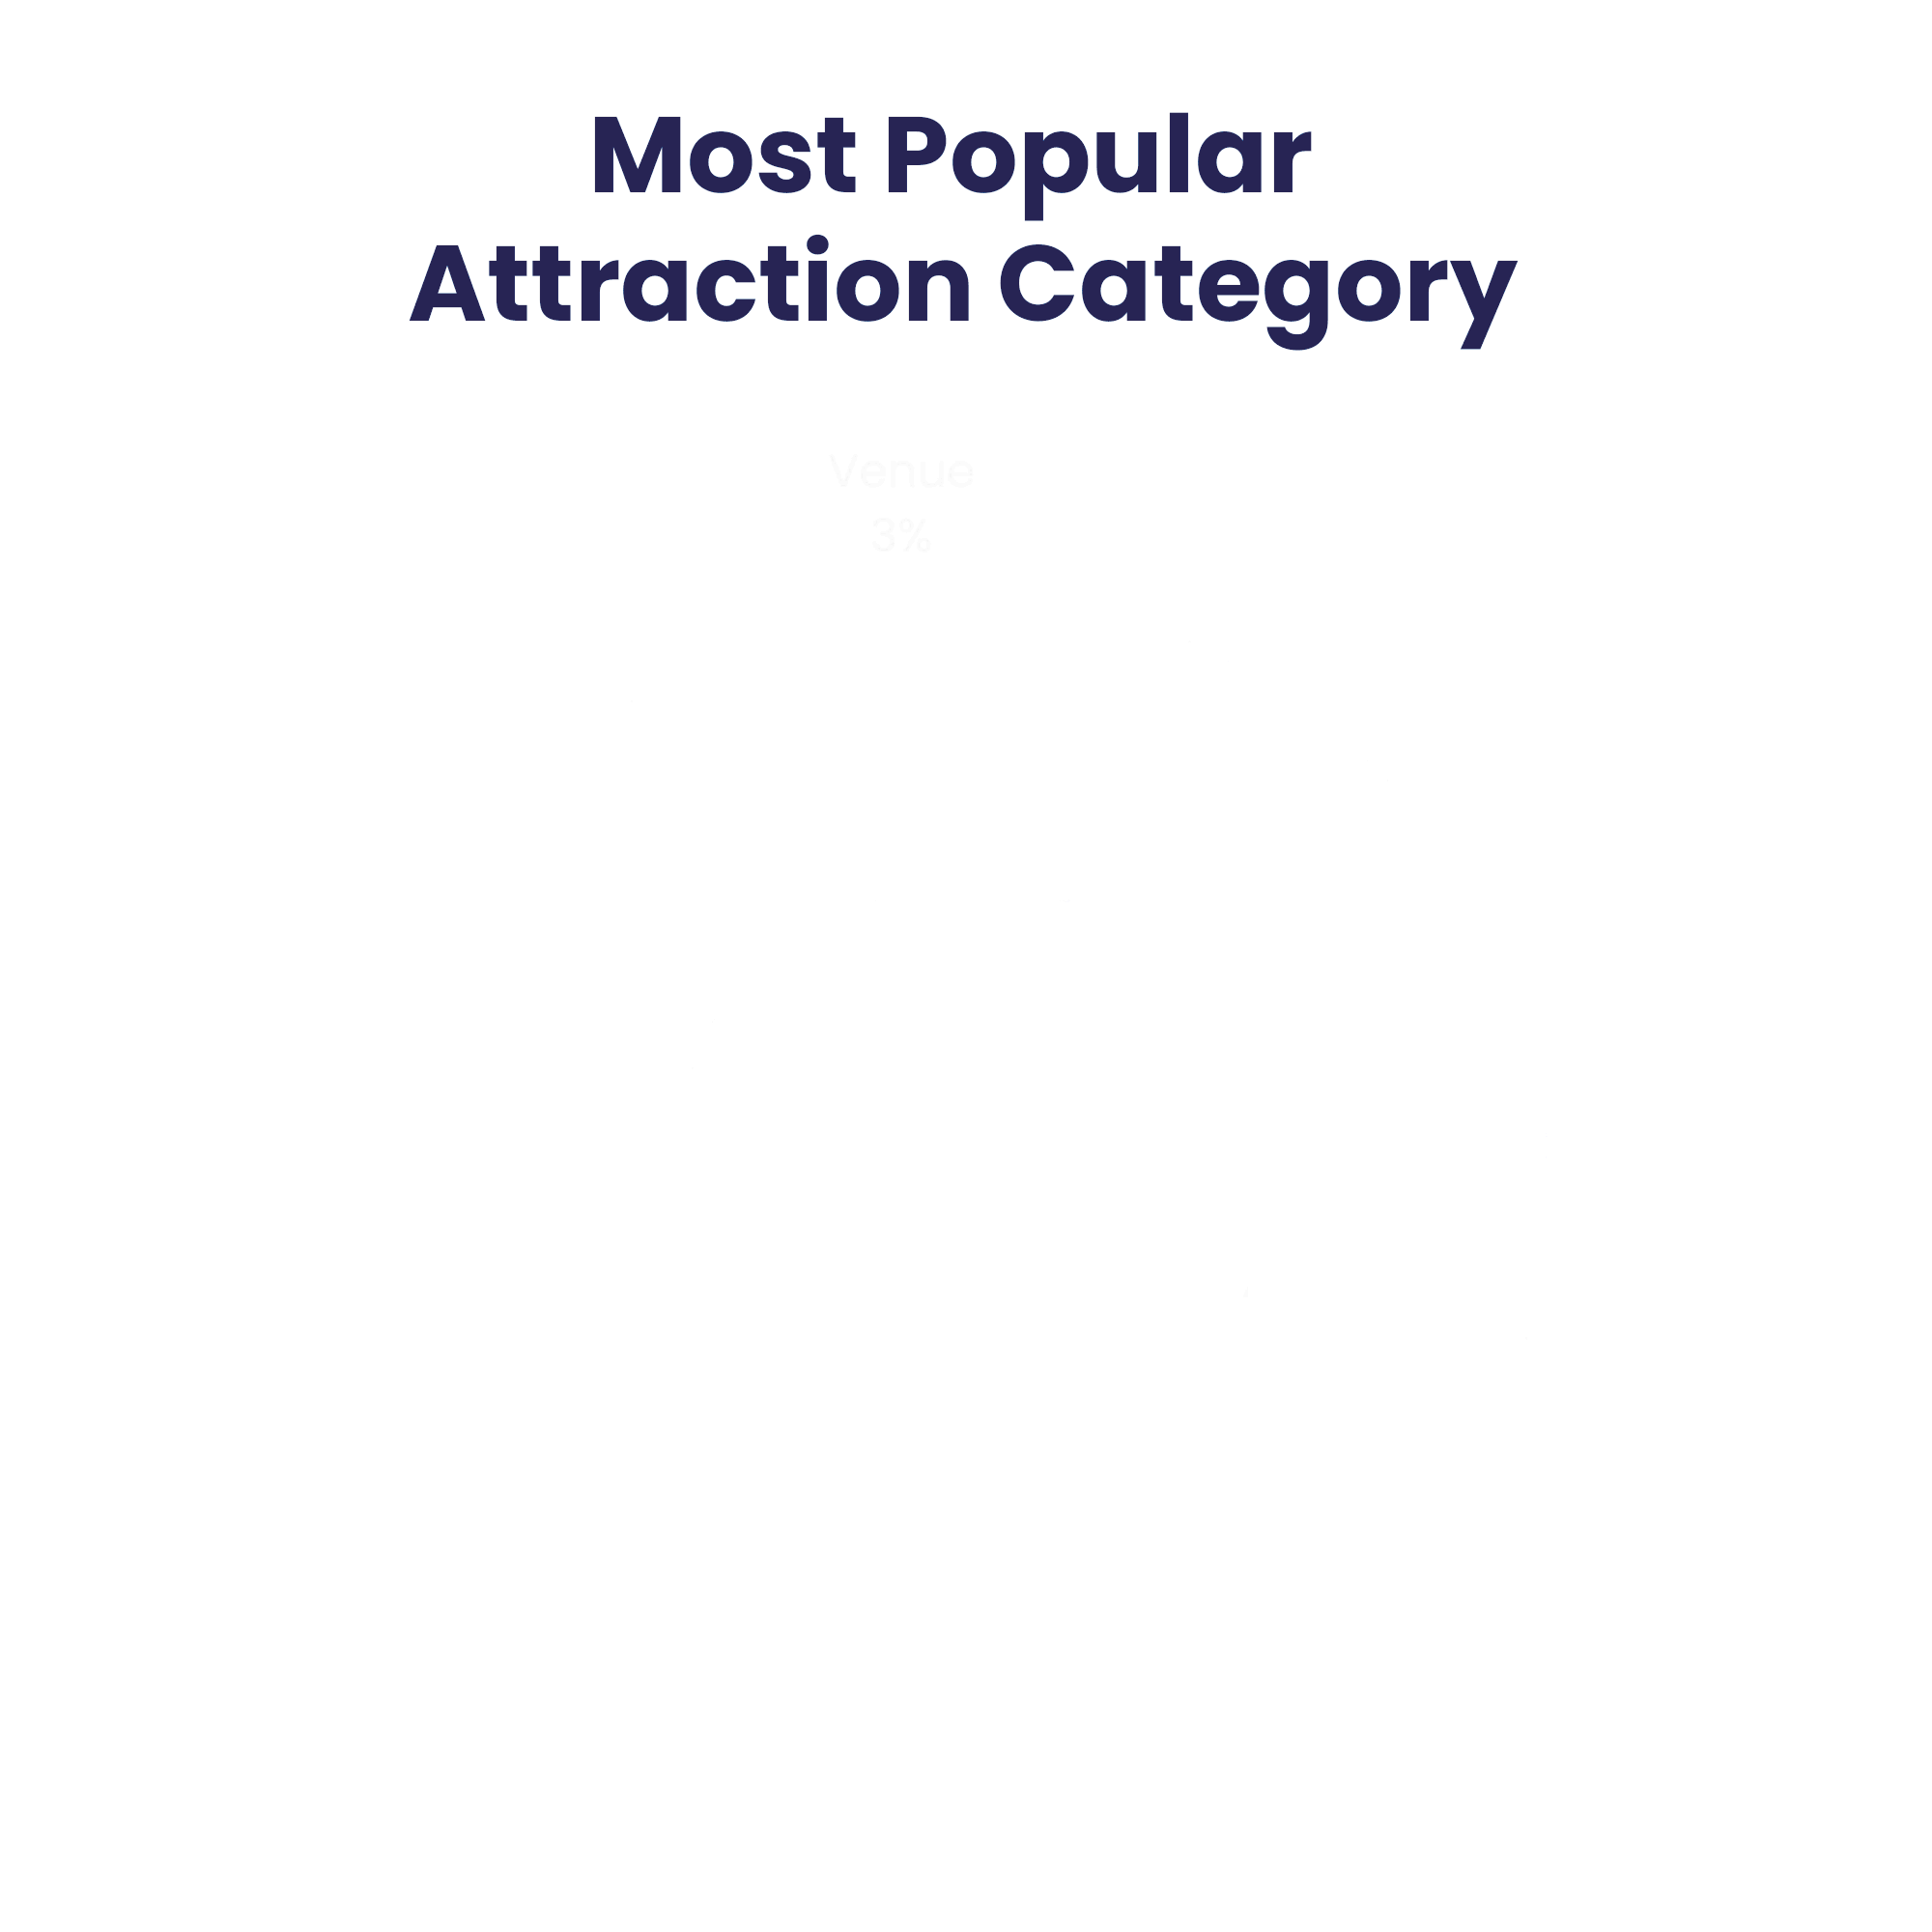 Most Popular Attraction Category